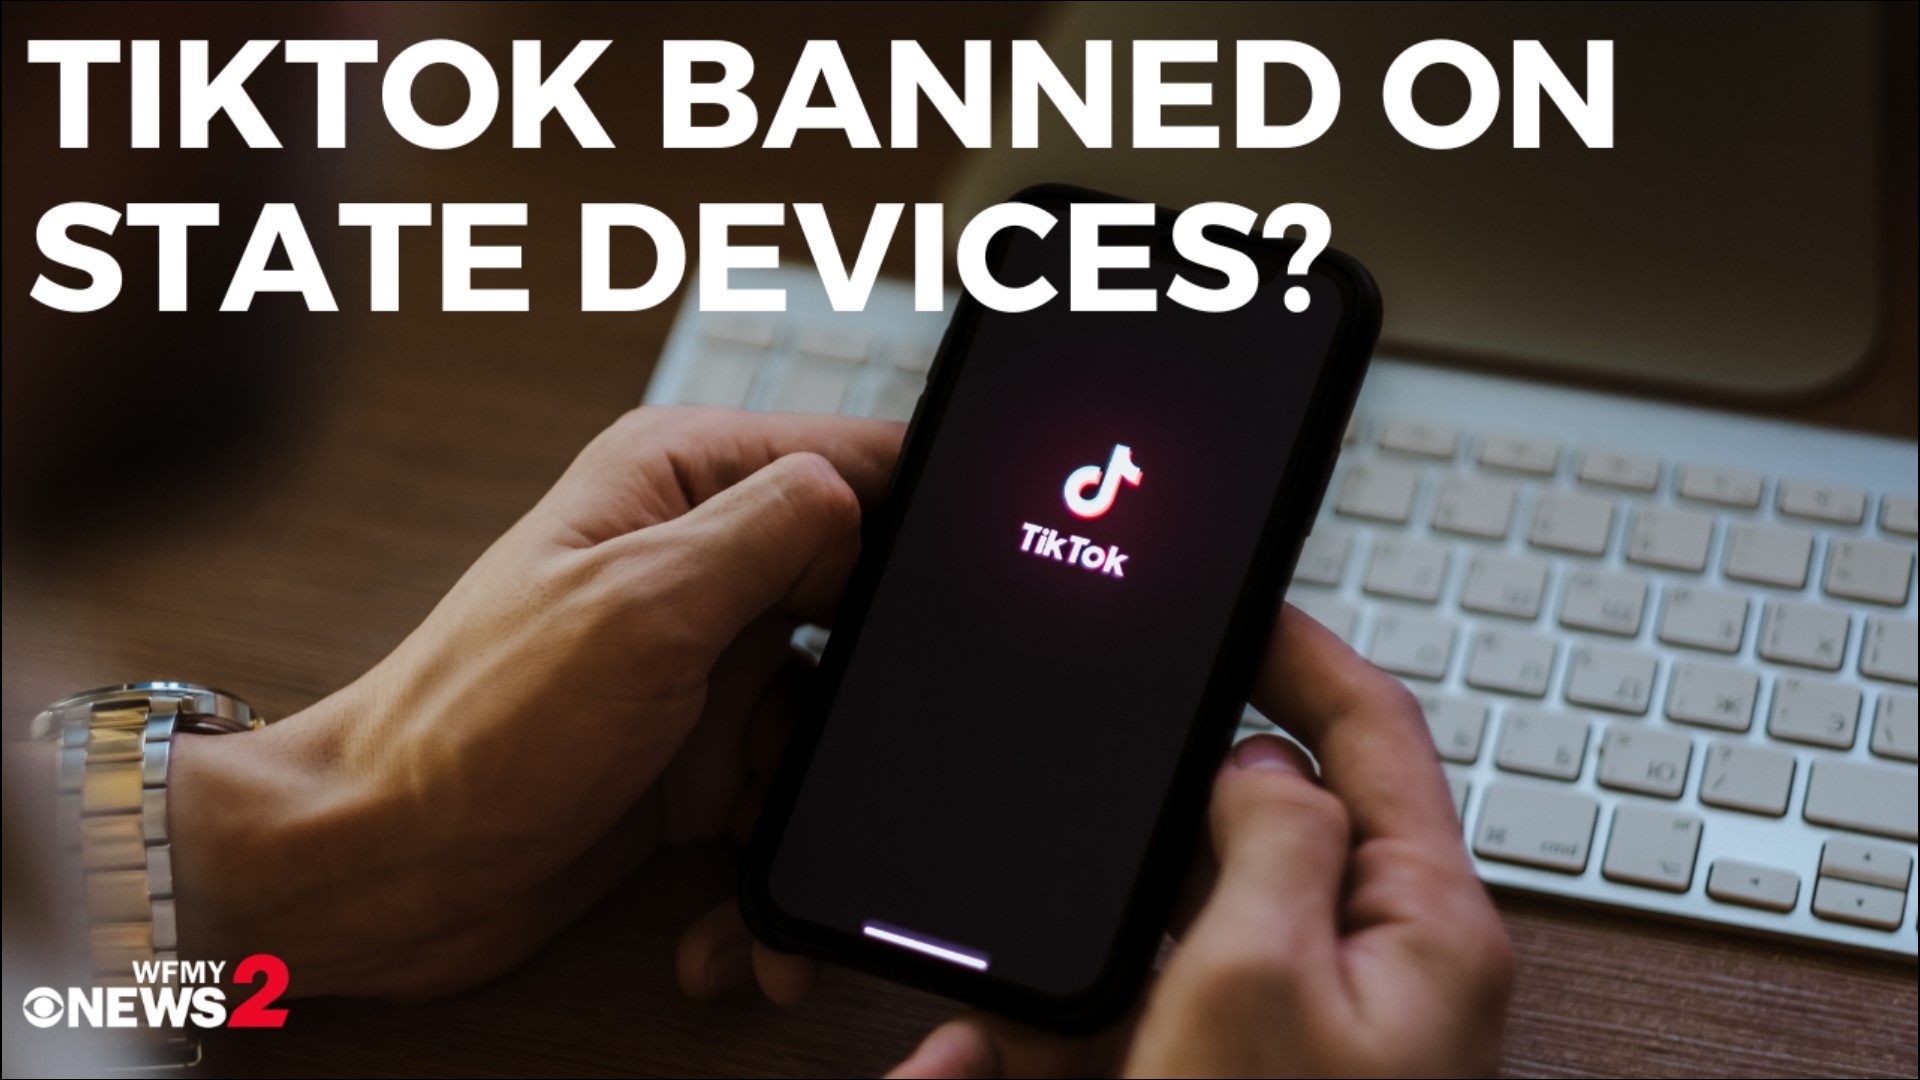 Federal lawmakers voted to ban the app due to concerns about data sharing and the app’s Chinese ownership. Now, state lawmakers want to take action.